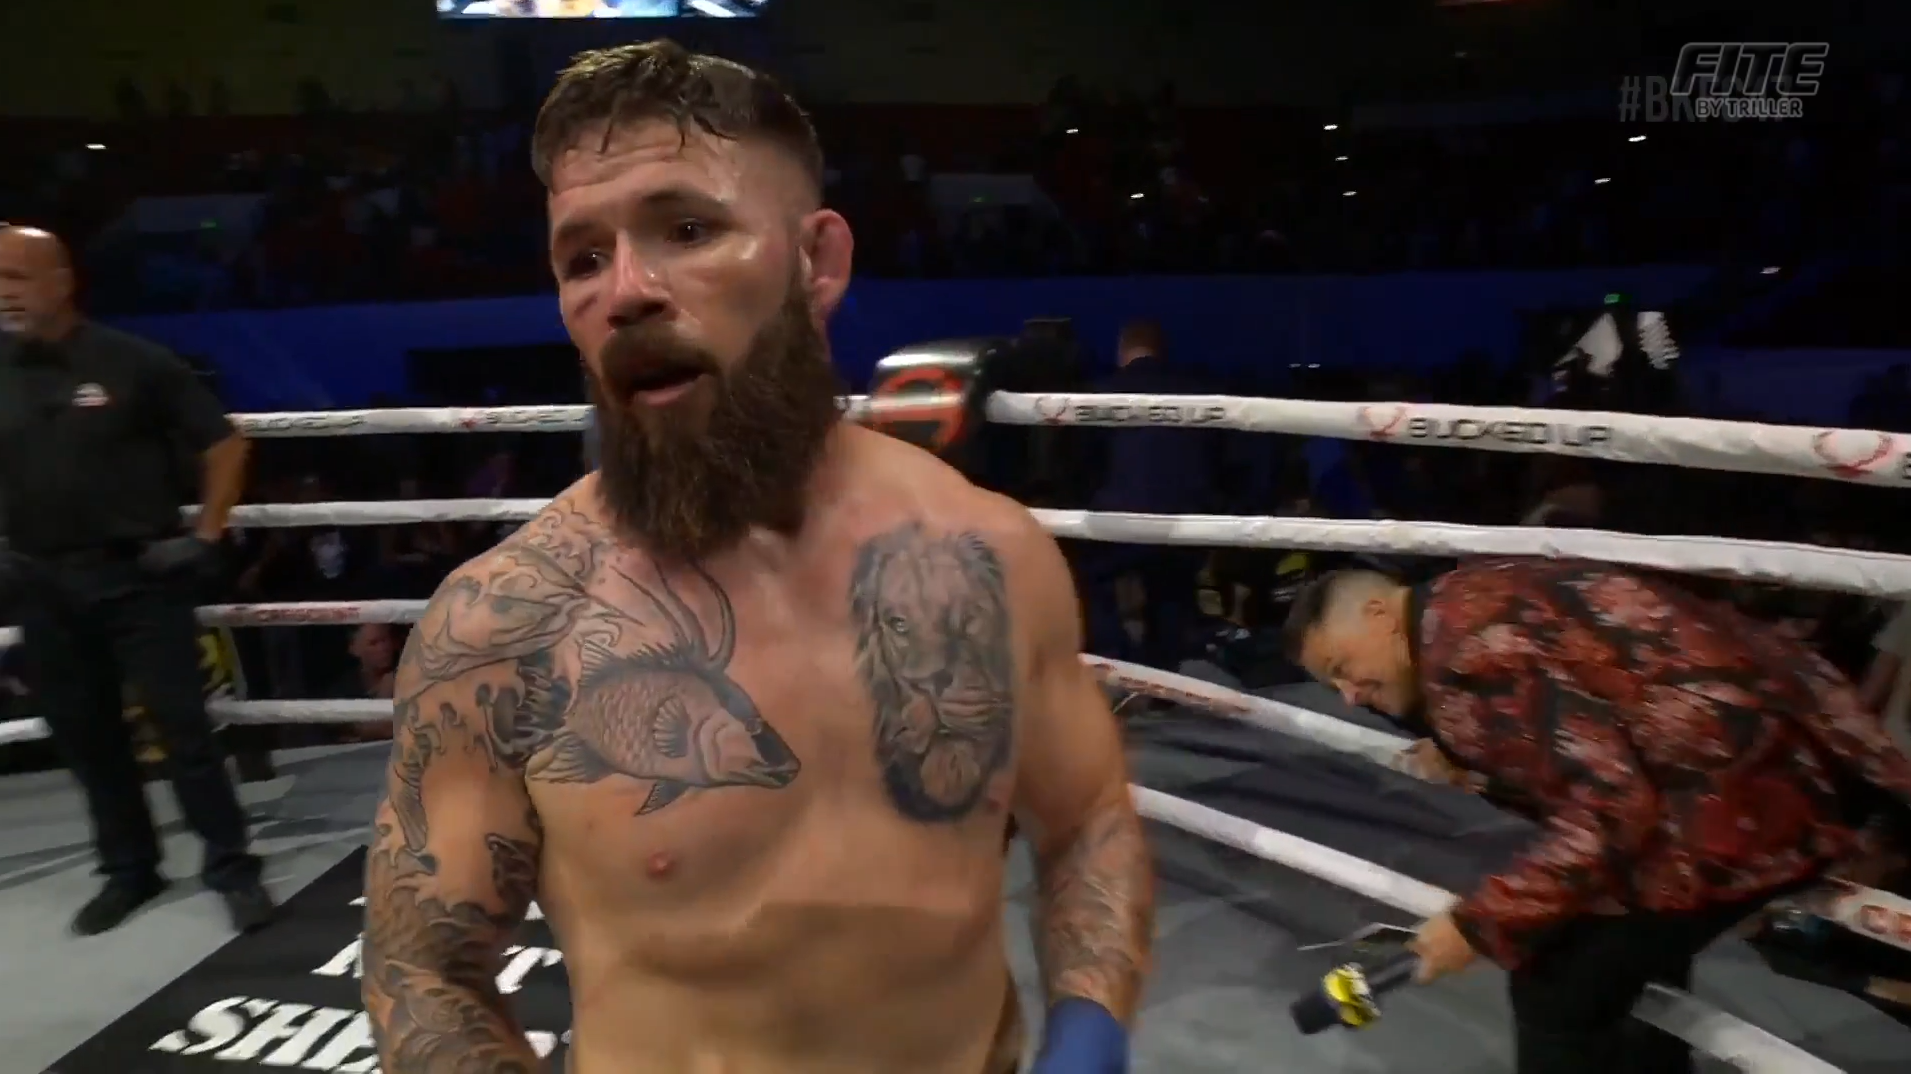 David Mundell wants Mike Perry after knocking out Mike Richman at BKFC 47